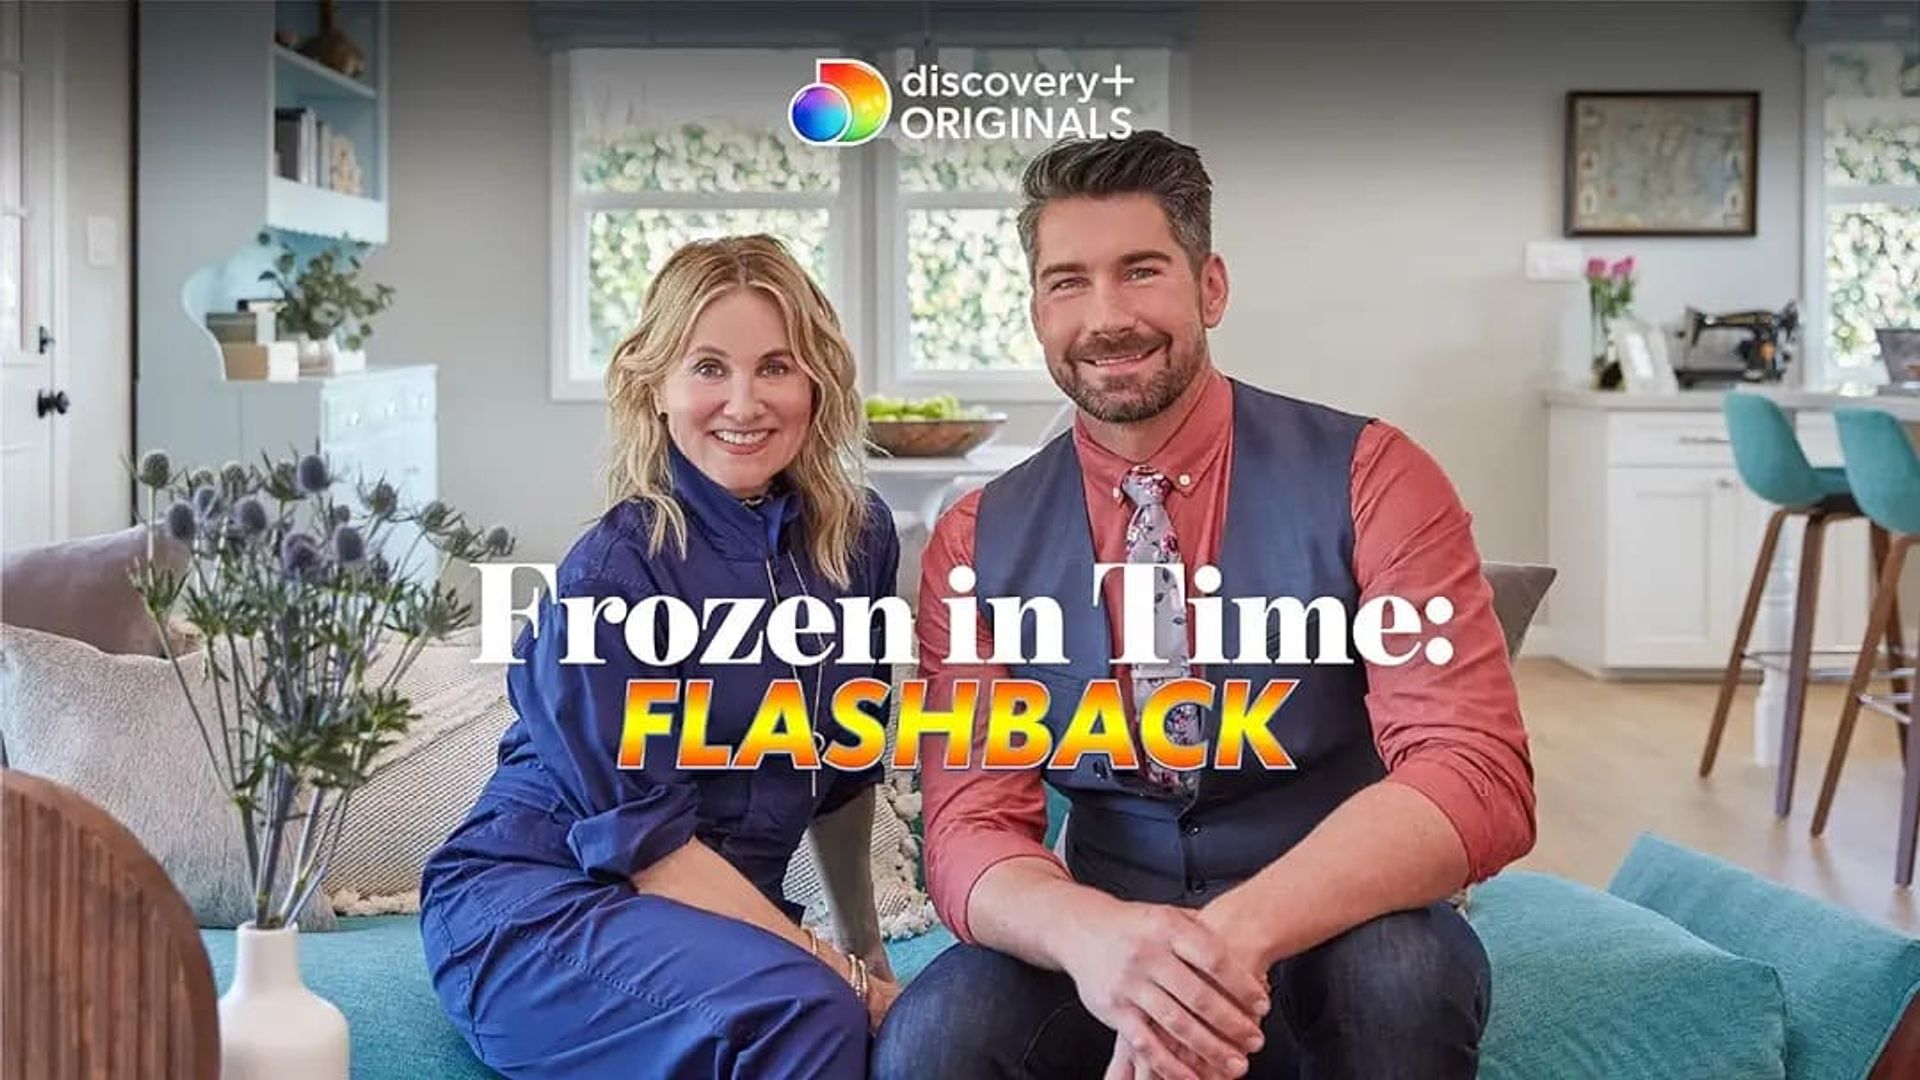 Frozen in Time: Flashback background